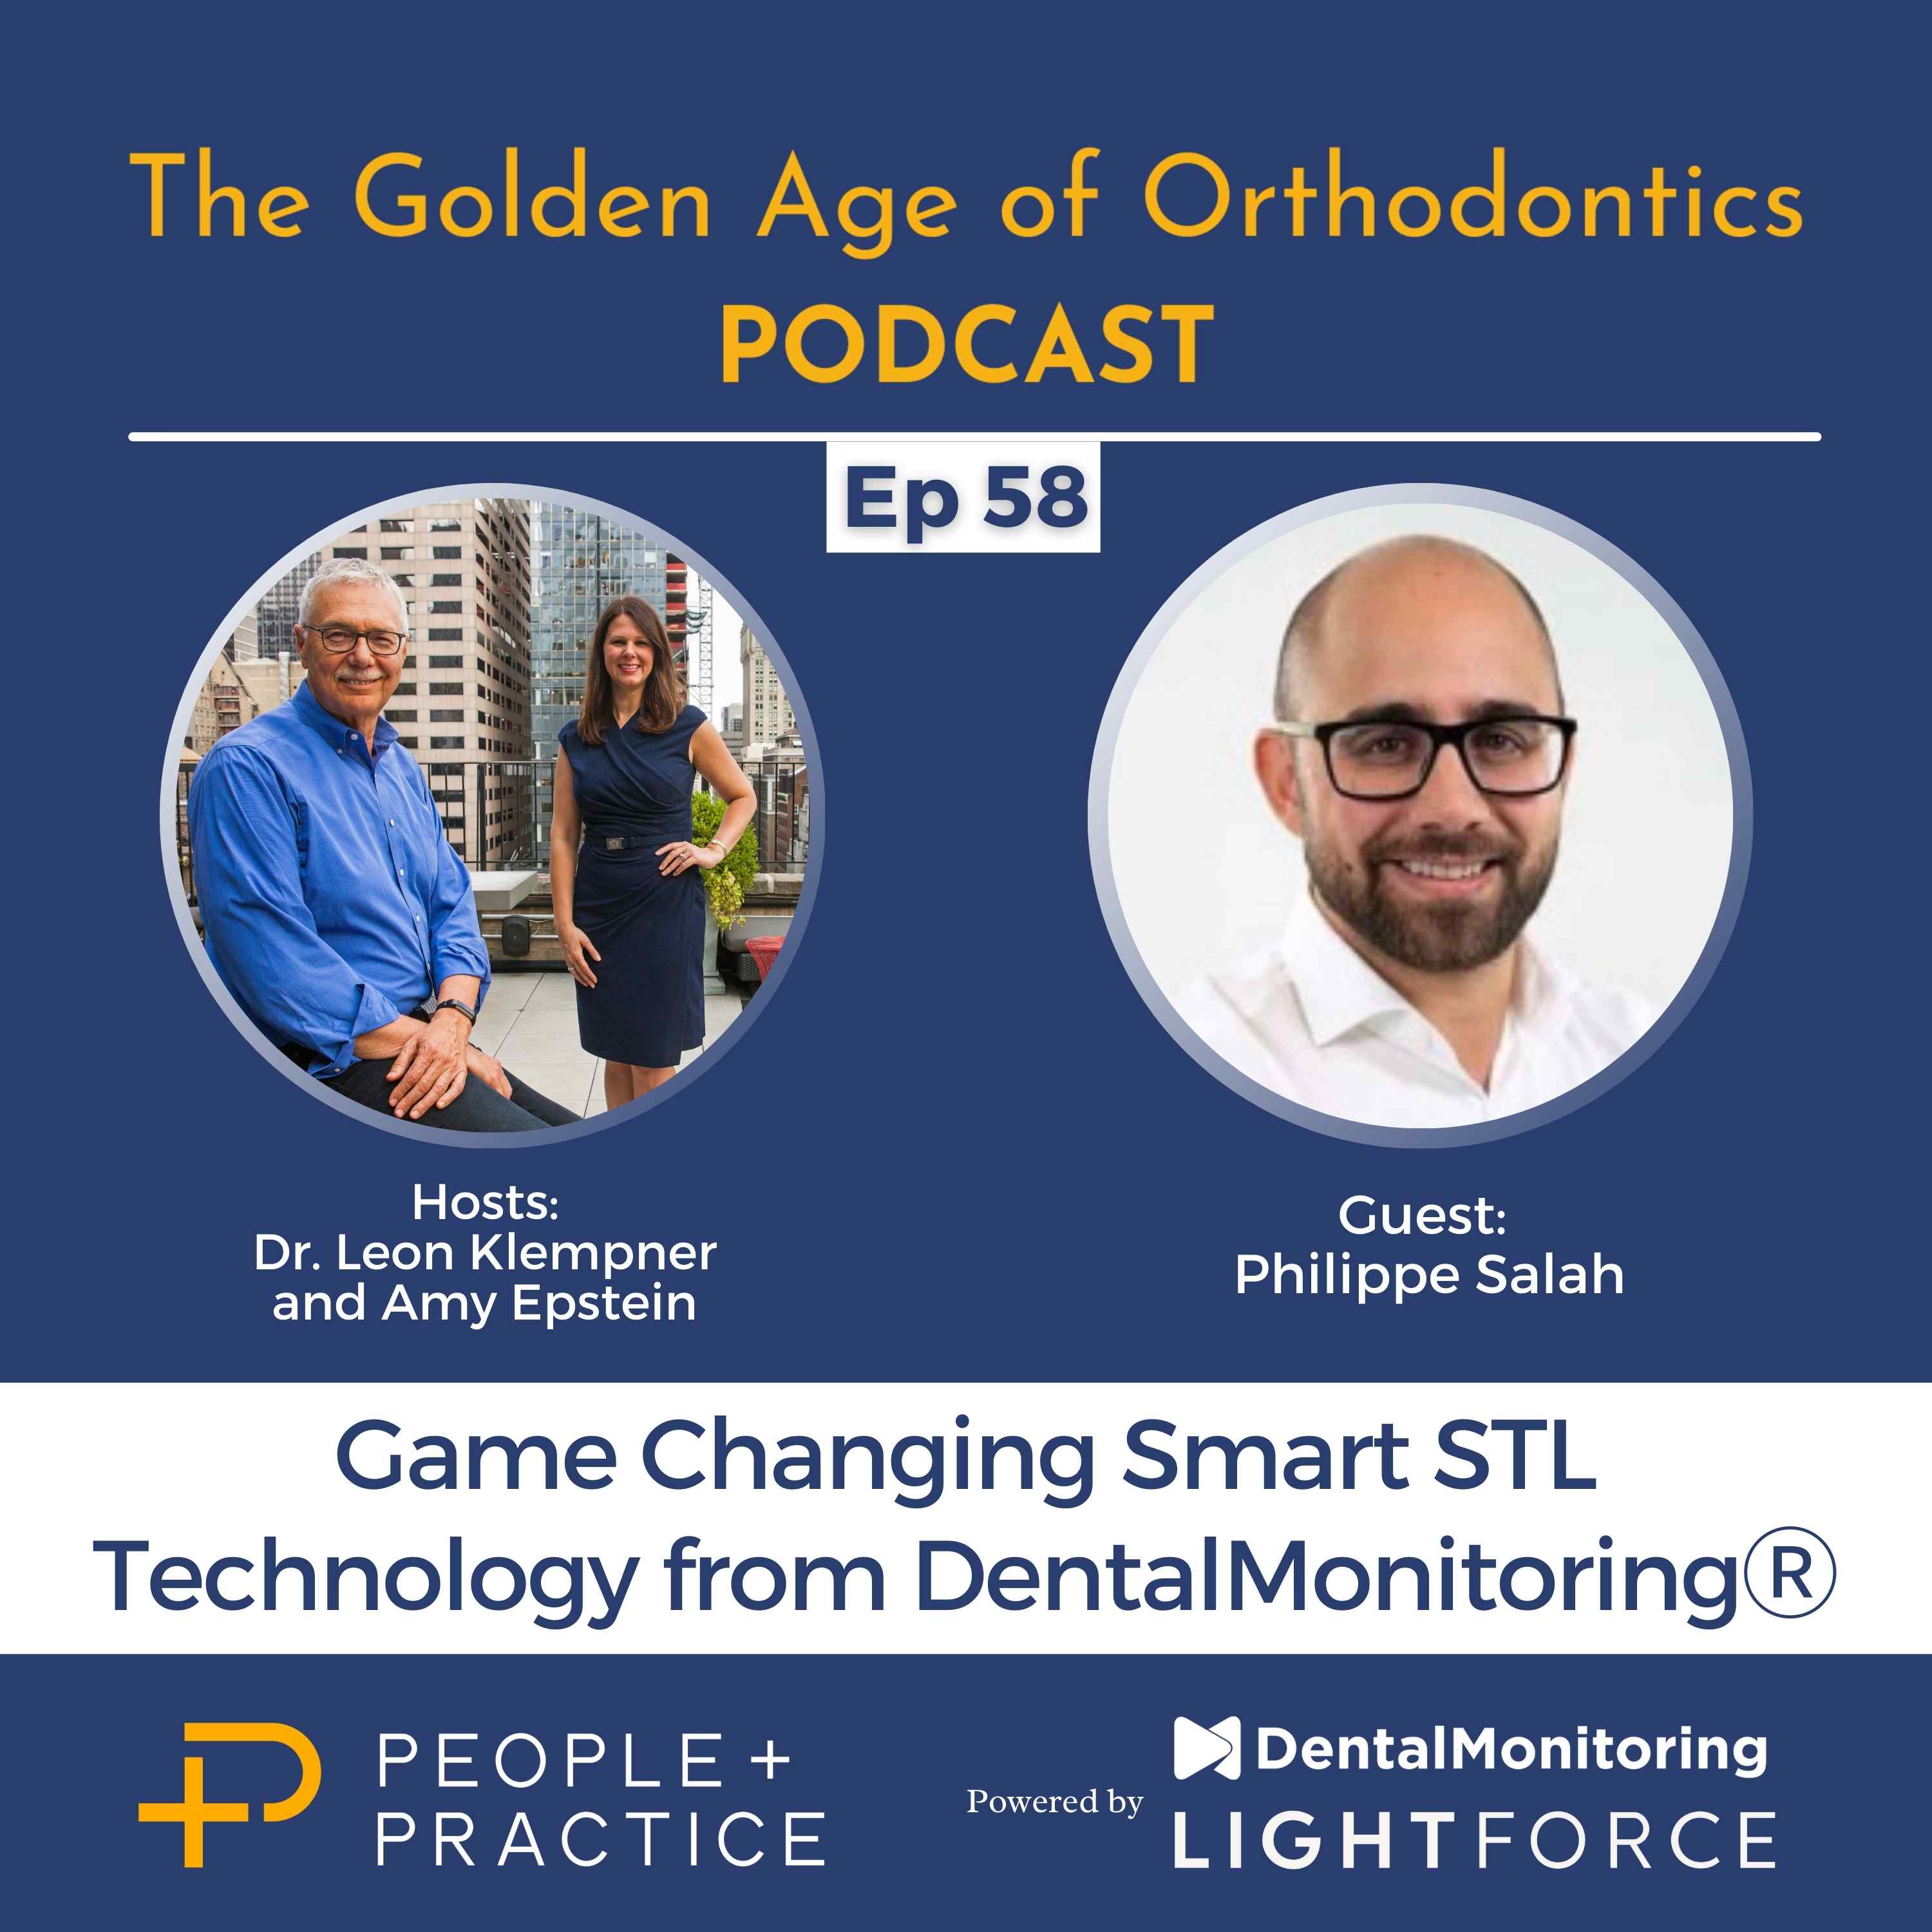 Game Changing Smart STL Technology from DentalMonitoringⓇ GUEST: Philippe Salah